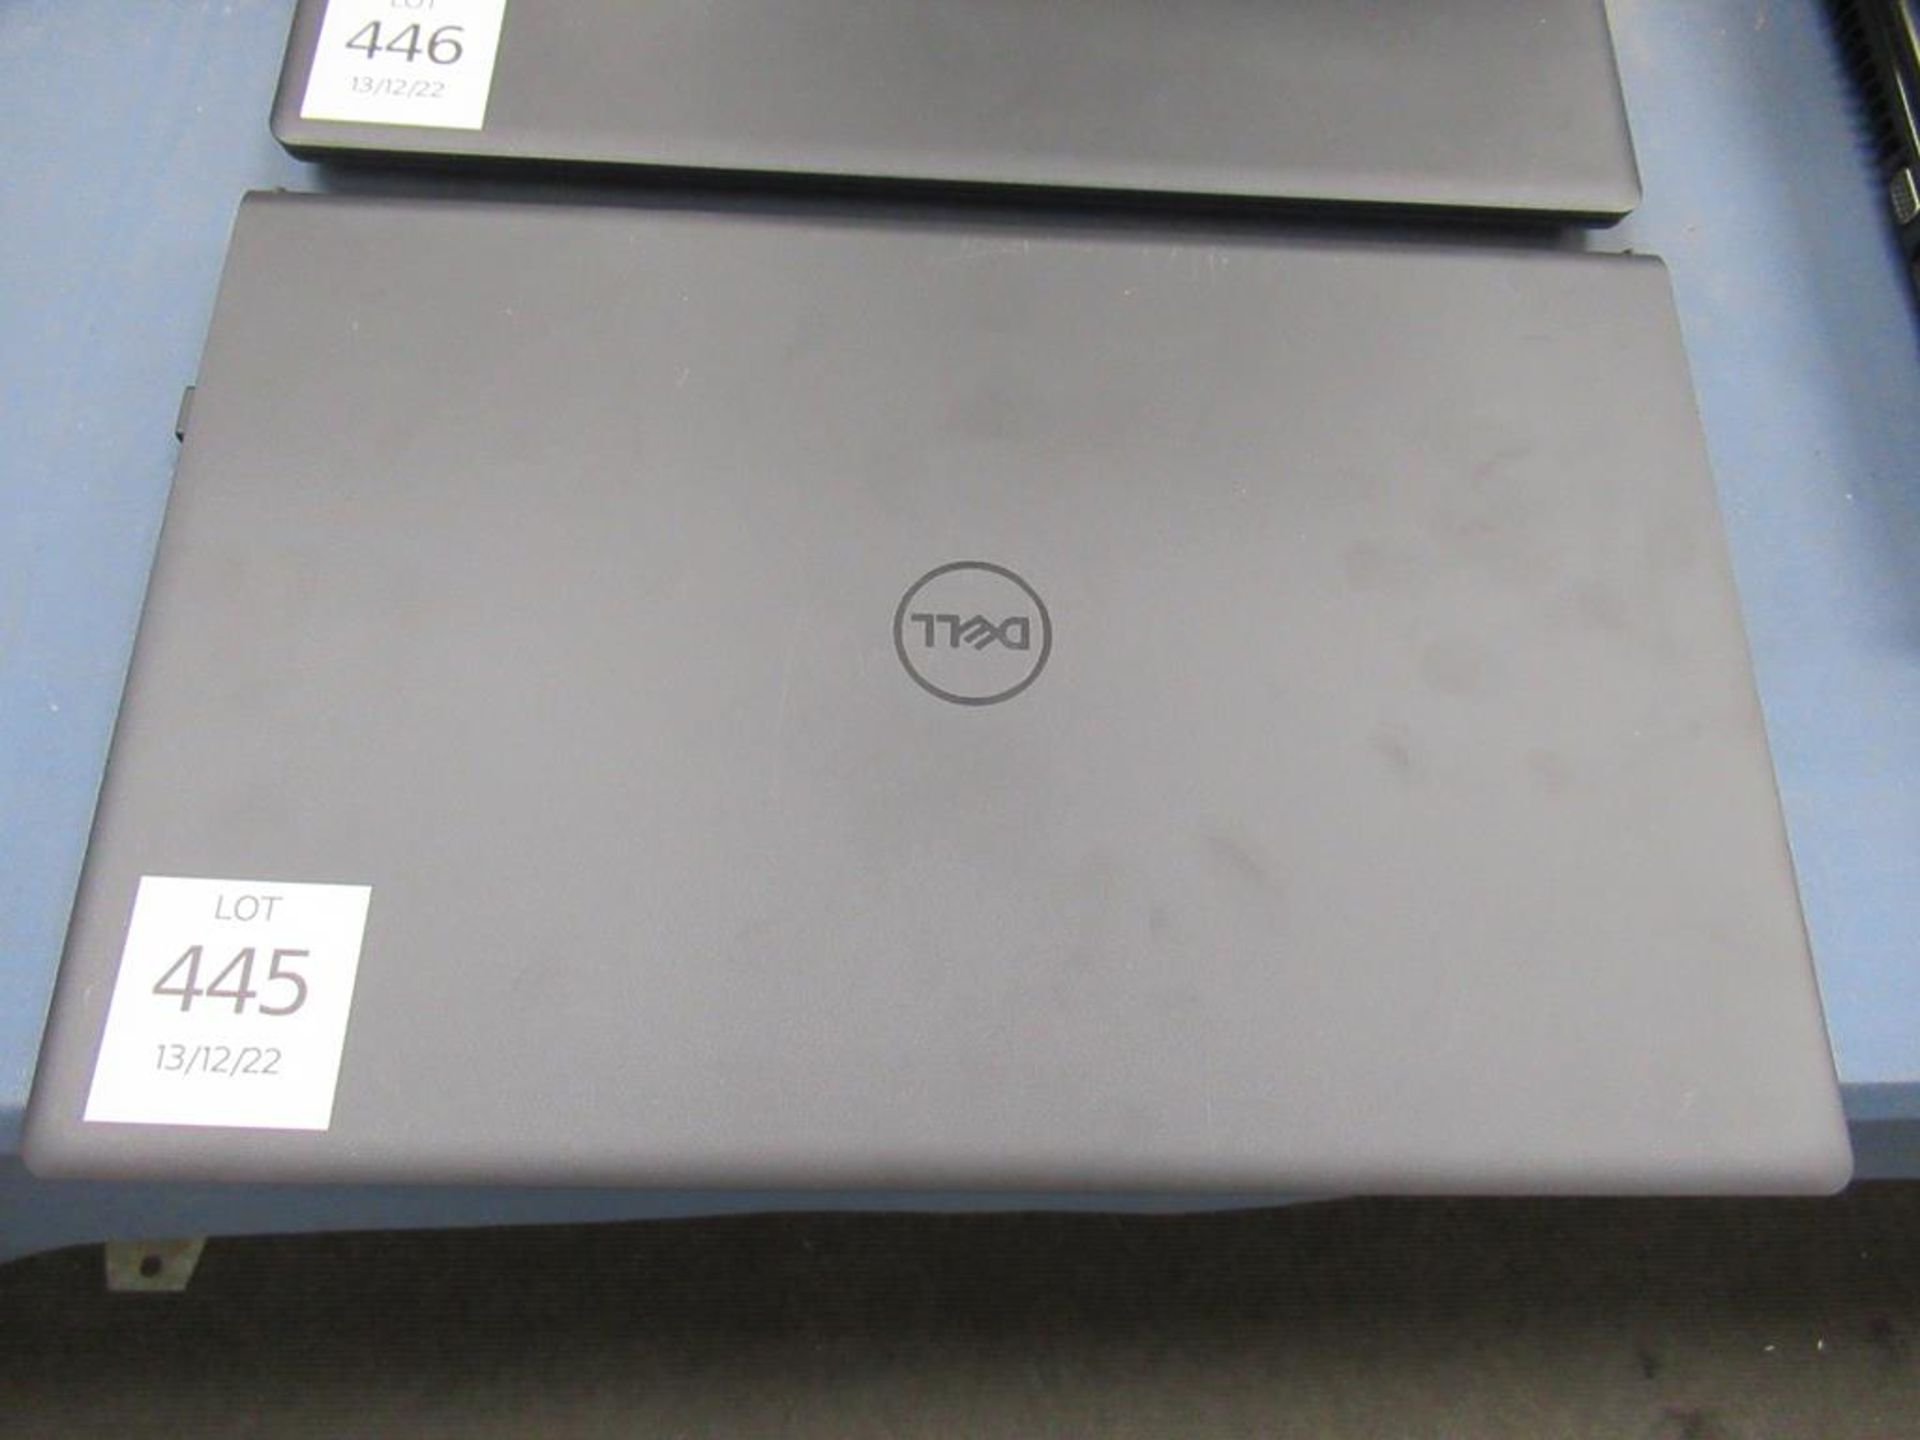 A Dell i5 Vostro Laptop (no hard drive or charger)